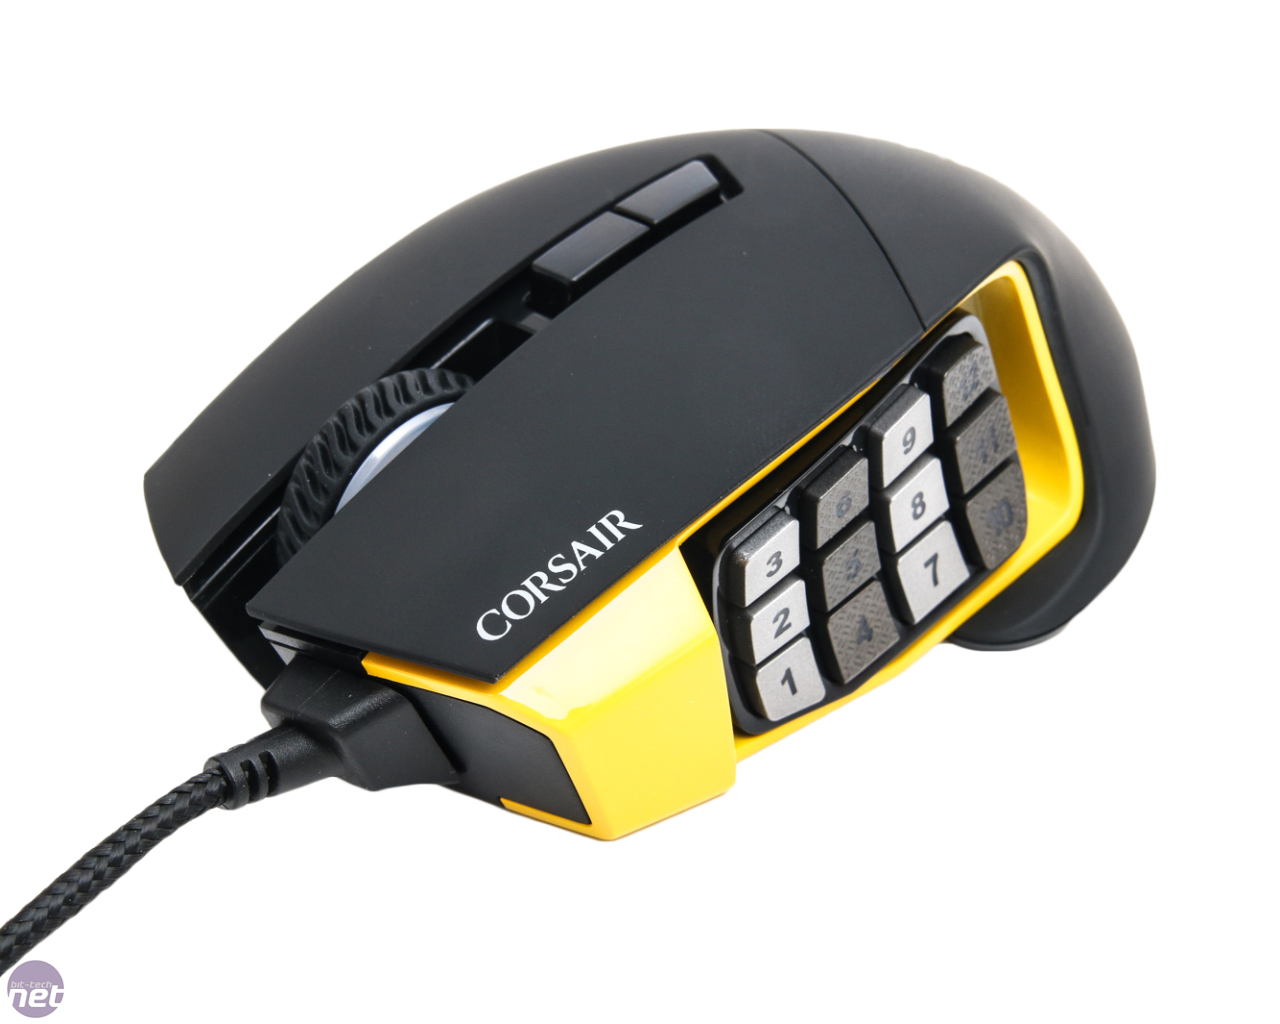 gaming mouse review